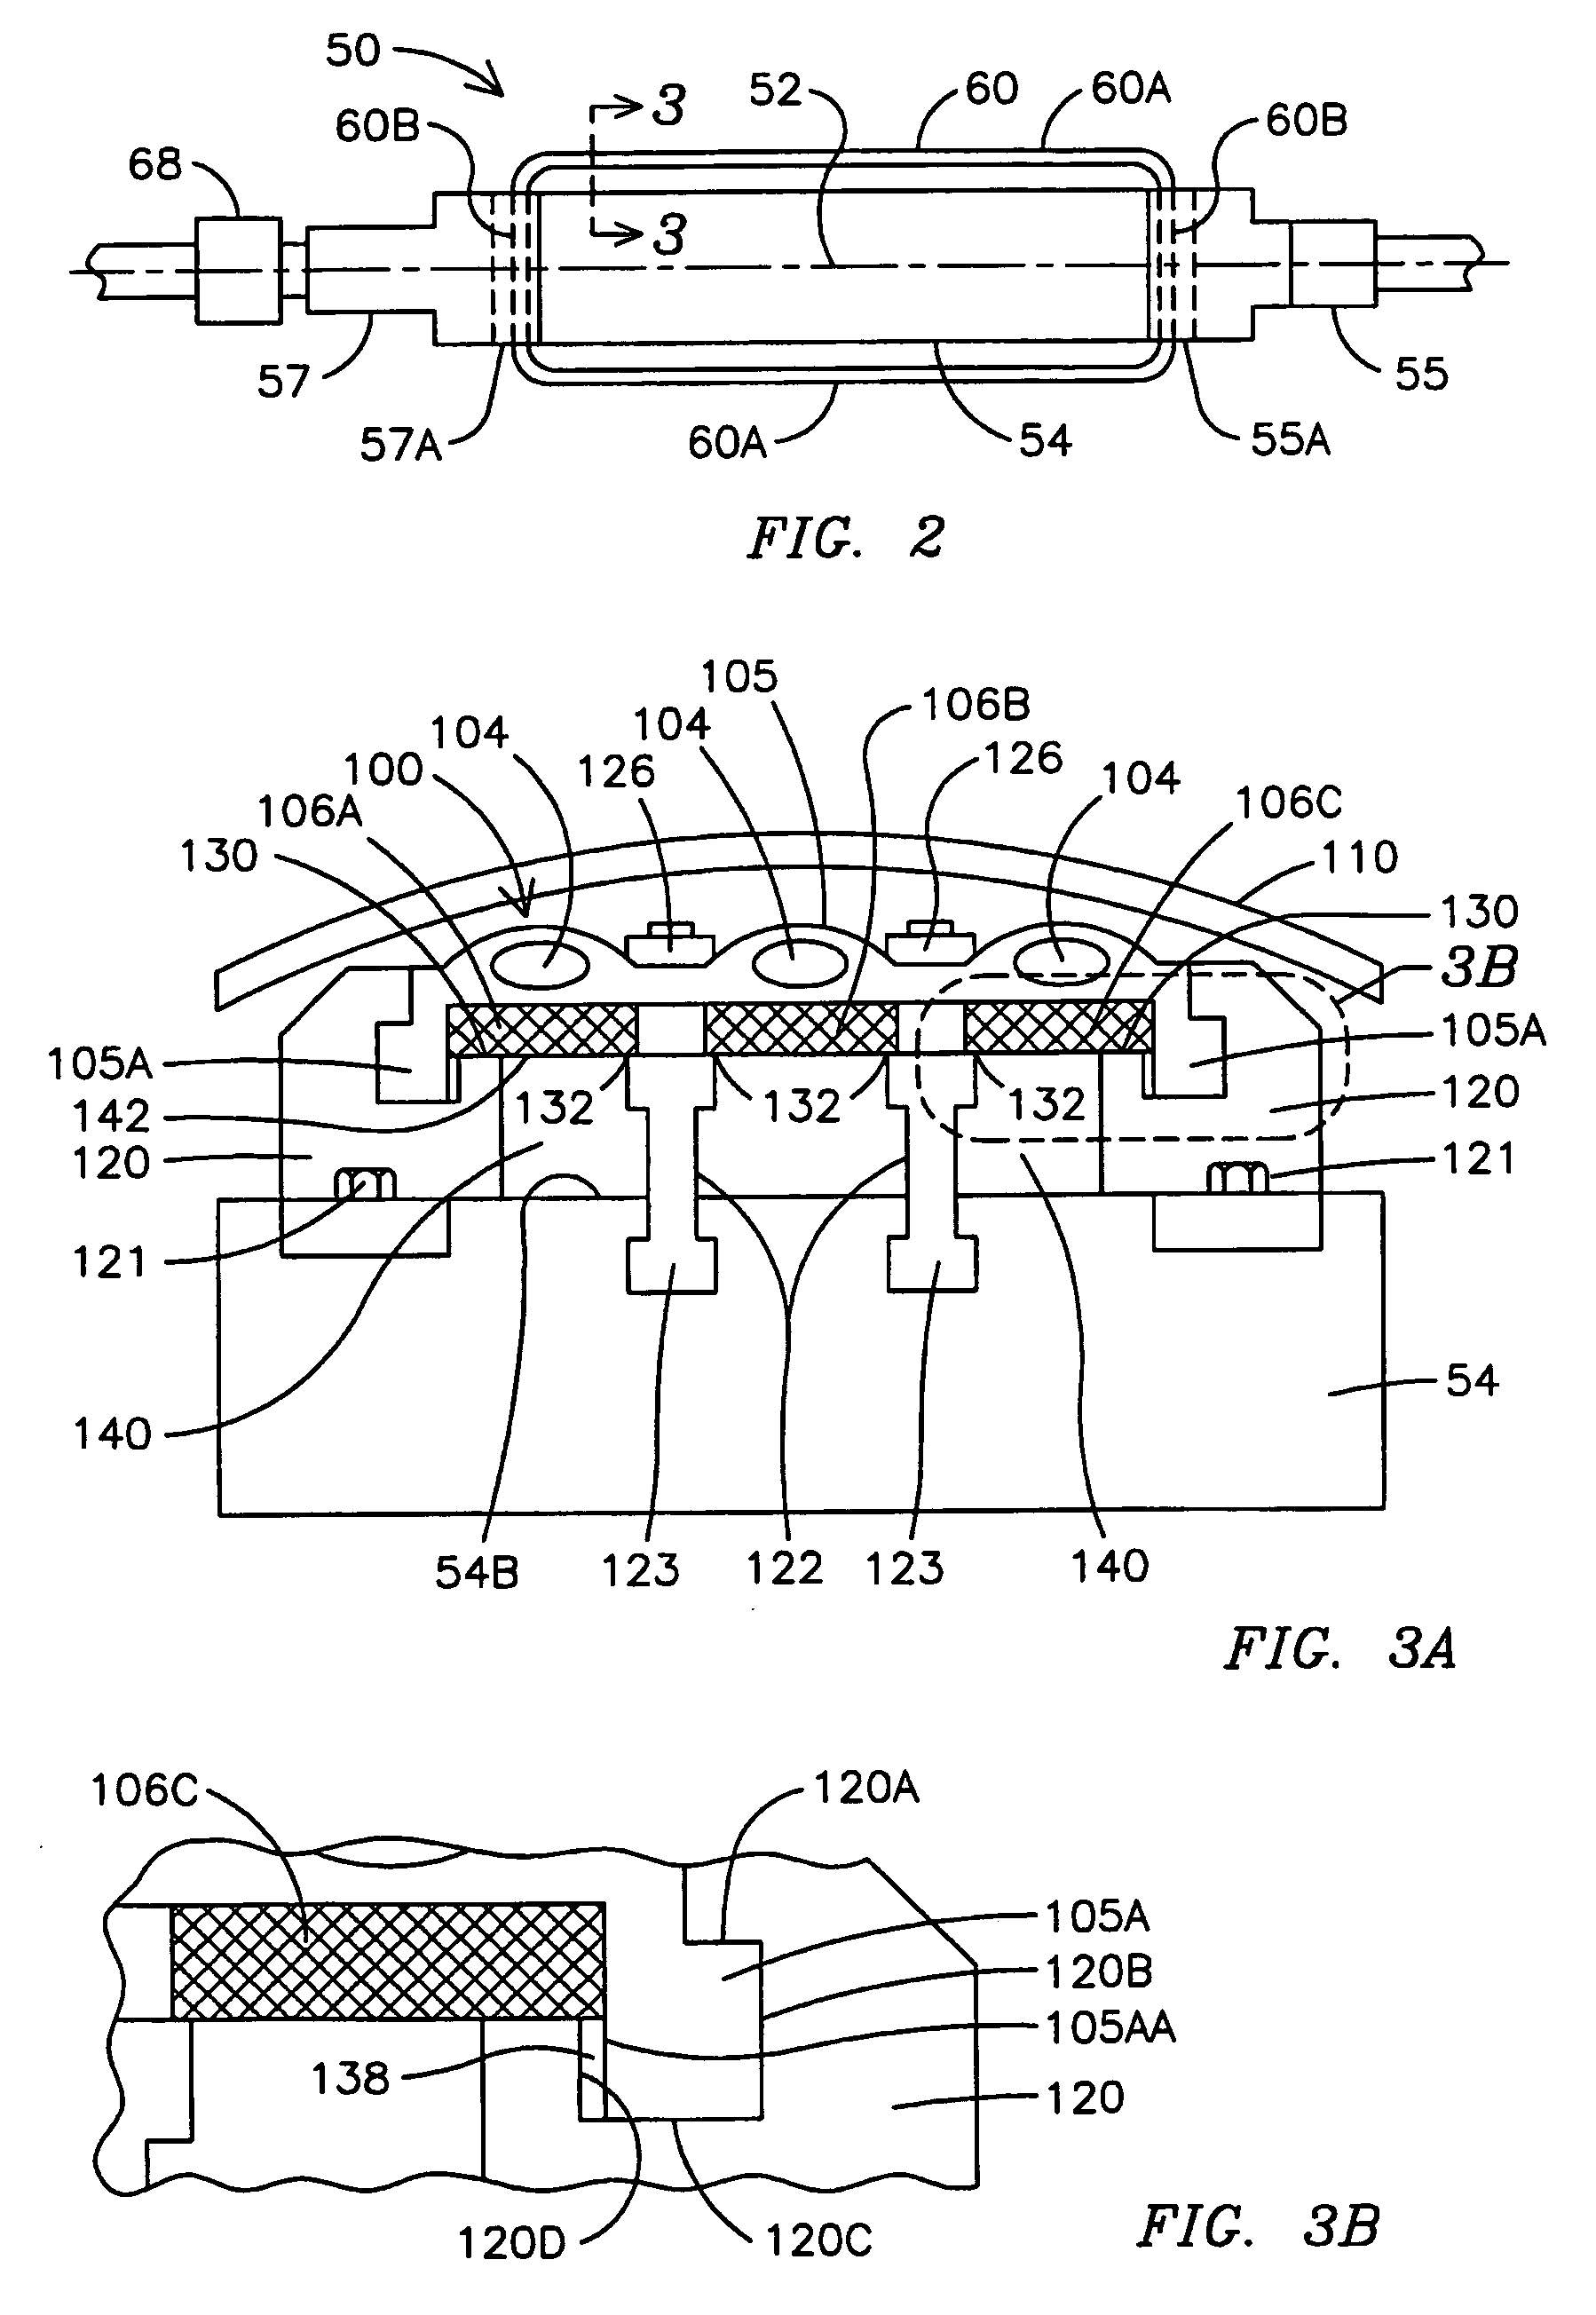 Superconducting coil support structures